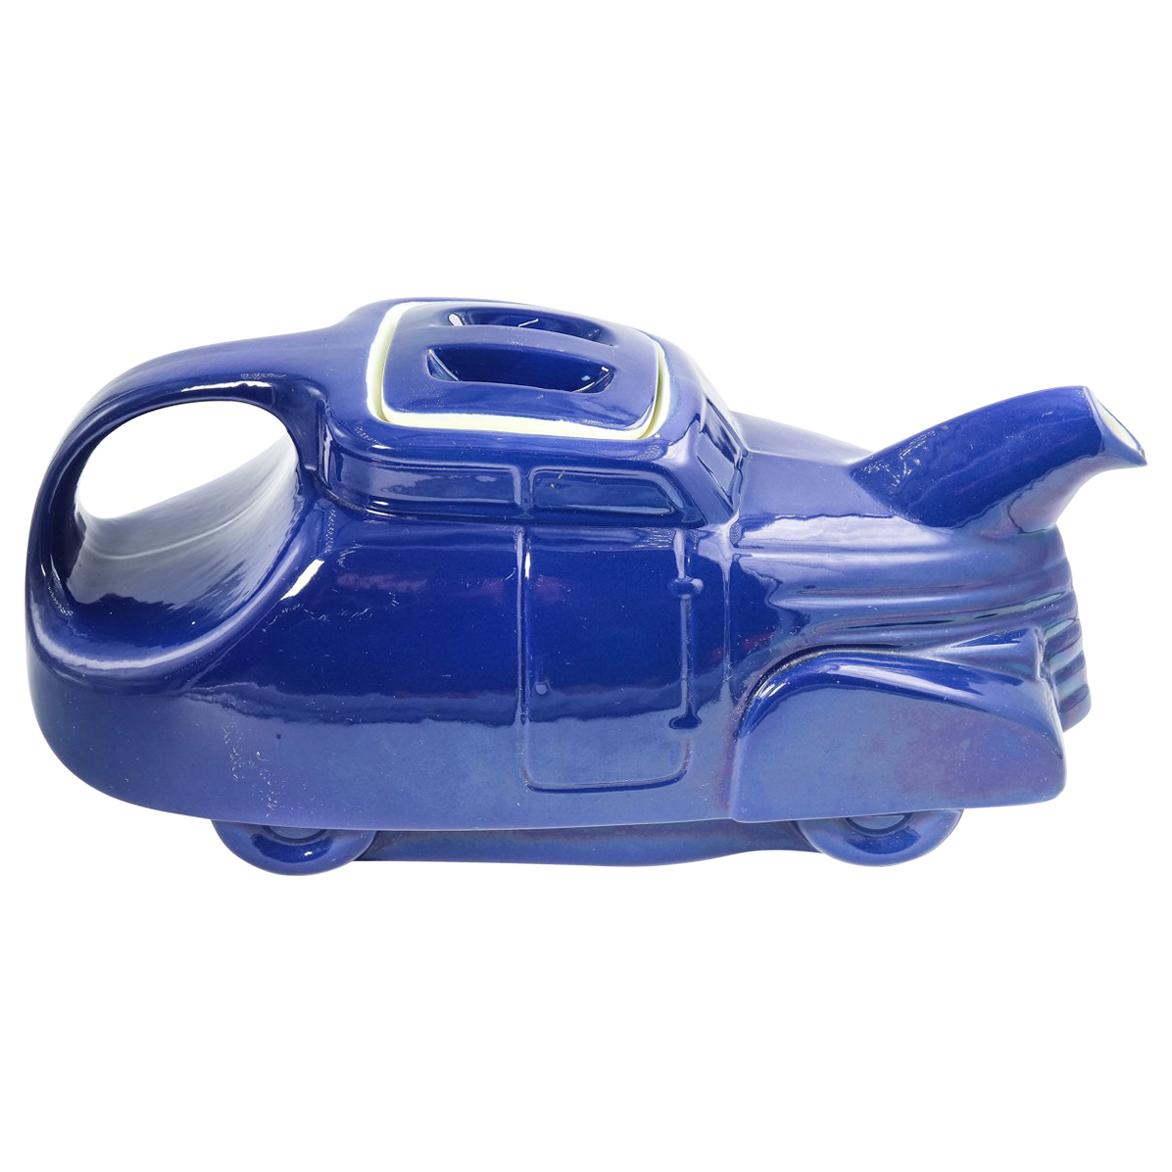 Automobile Teapot in Royal Blue by Hall, circa 1930s For Sale